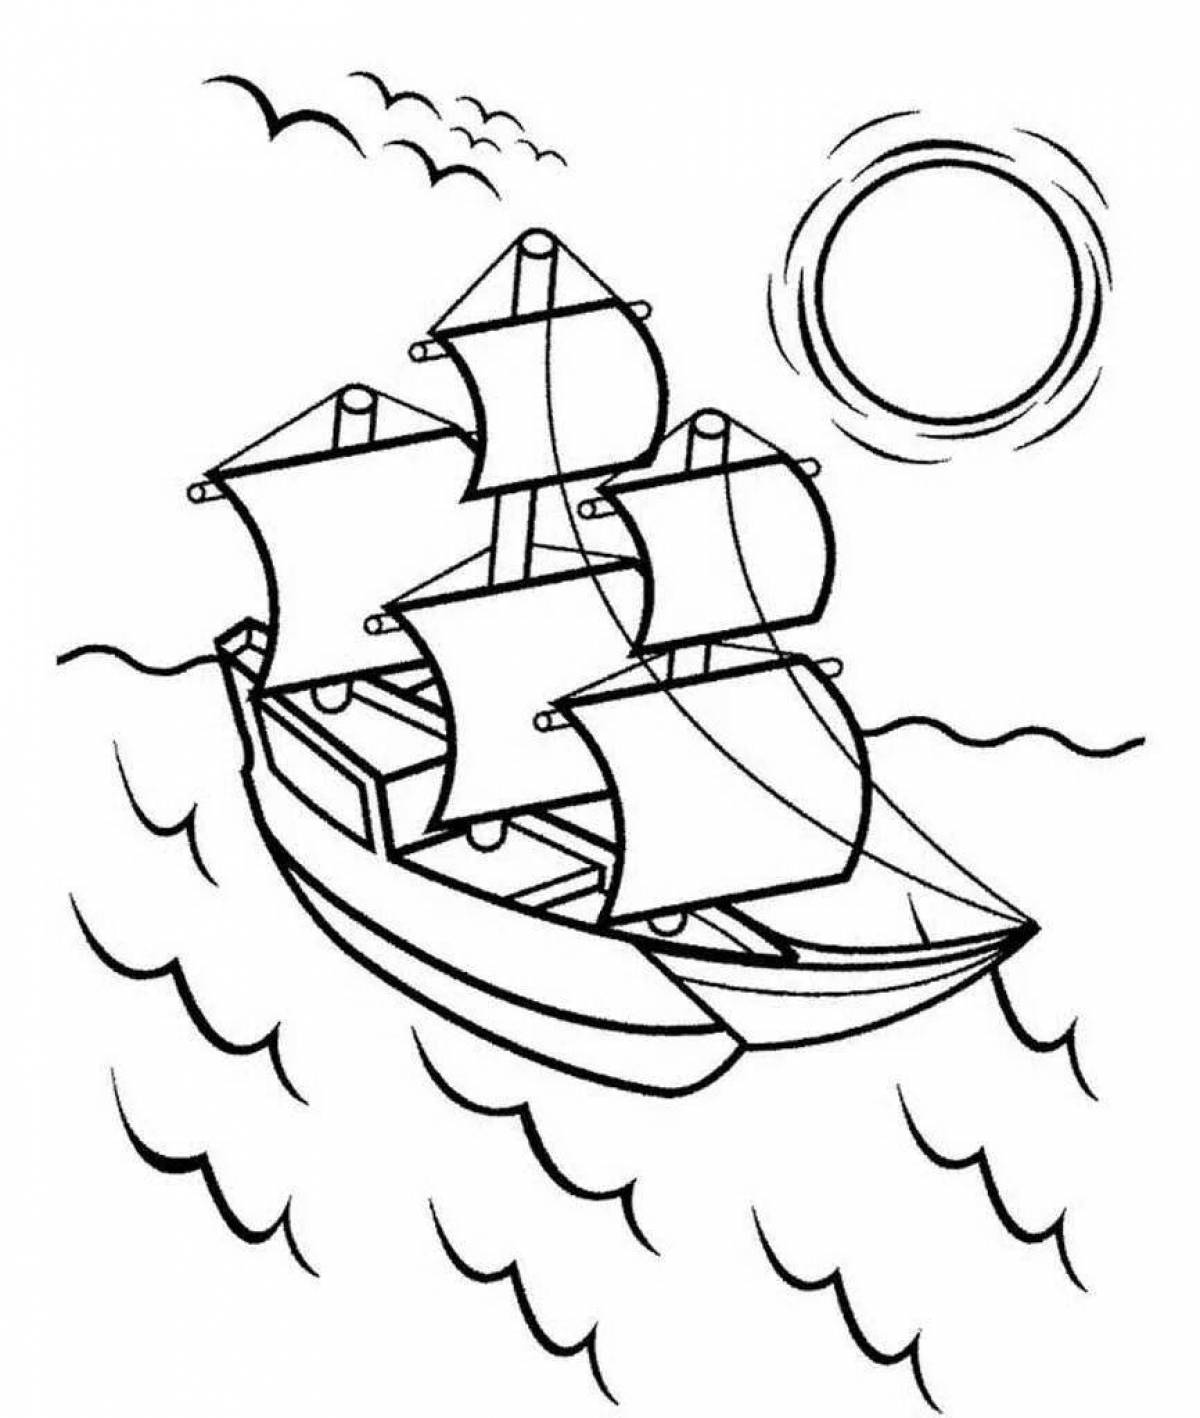 Impressive ship coloring page for kids